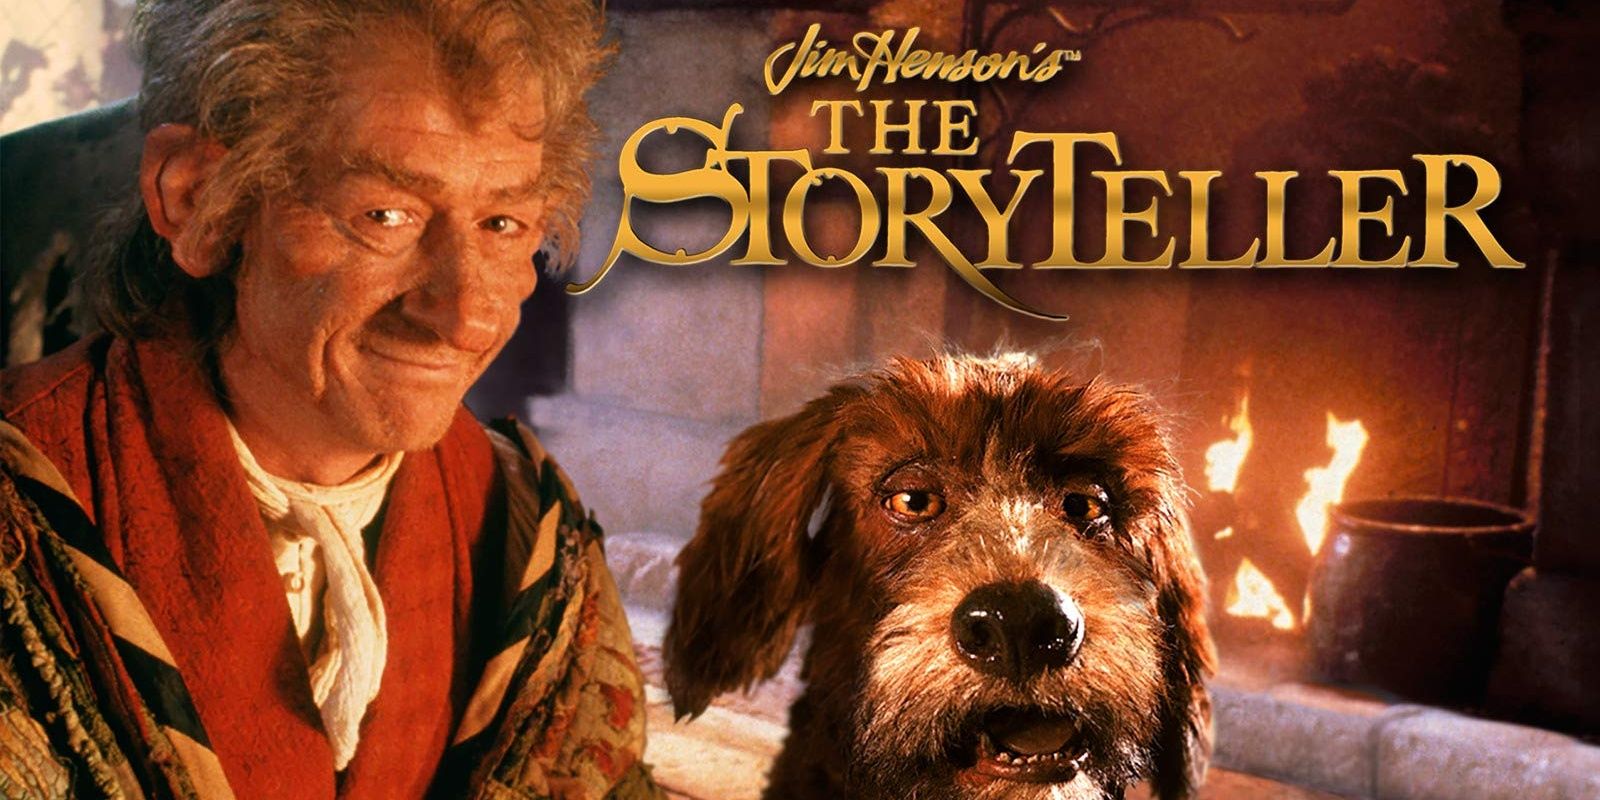 John Hurt smiling while sitting with a dog in The Storyteller